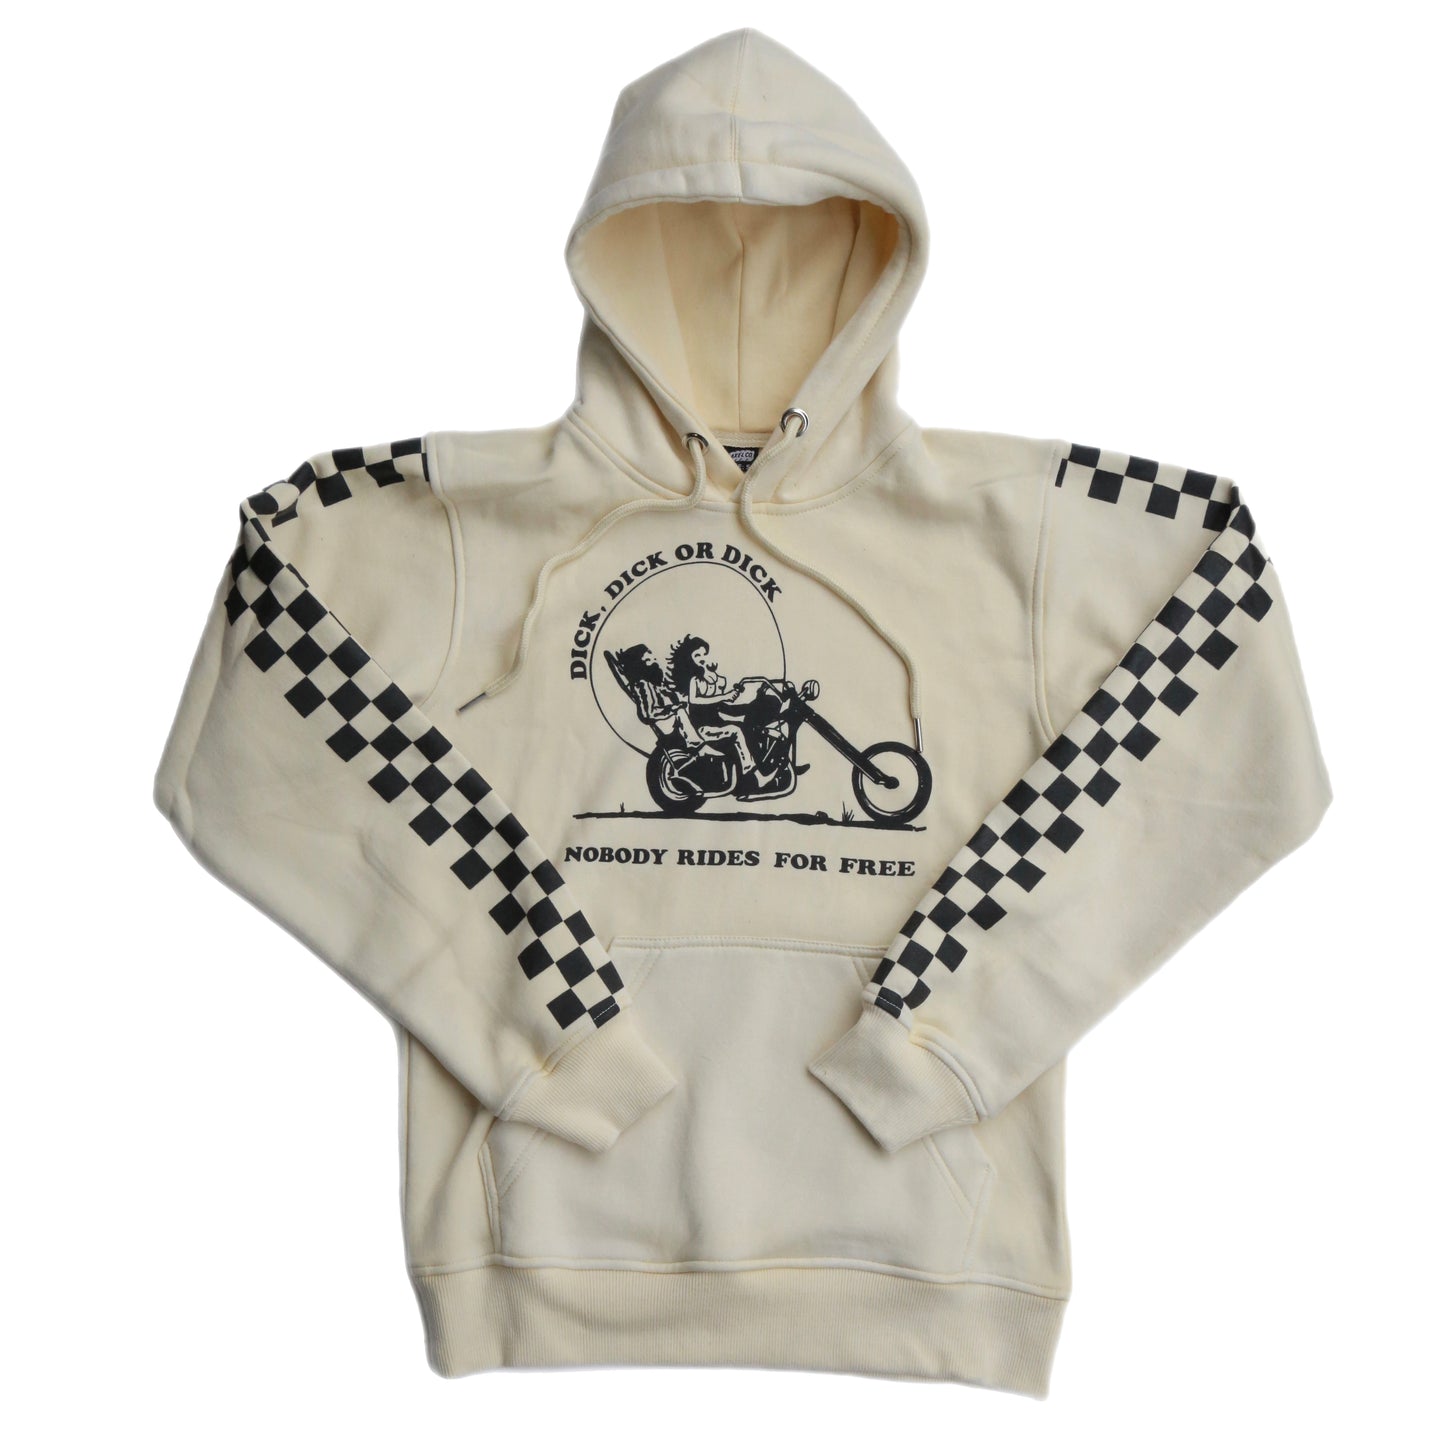 Axel Co  "Nobody Rides For Free" Motorcycle Checkered Hoodie